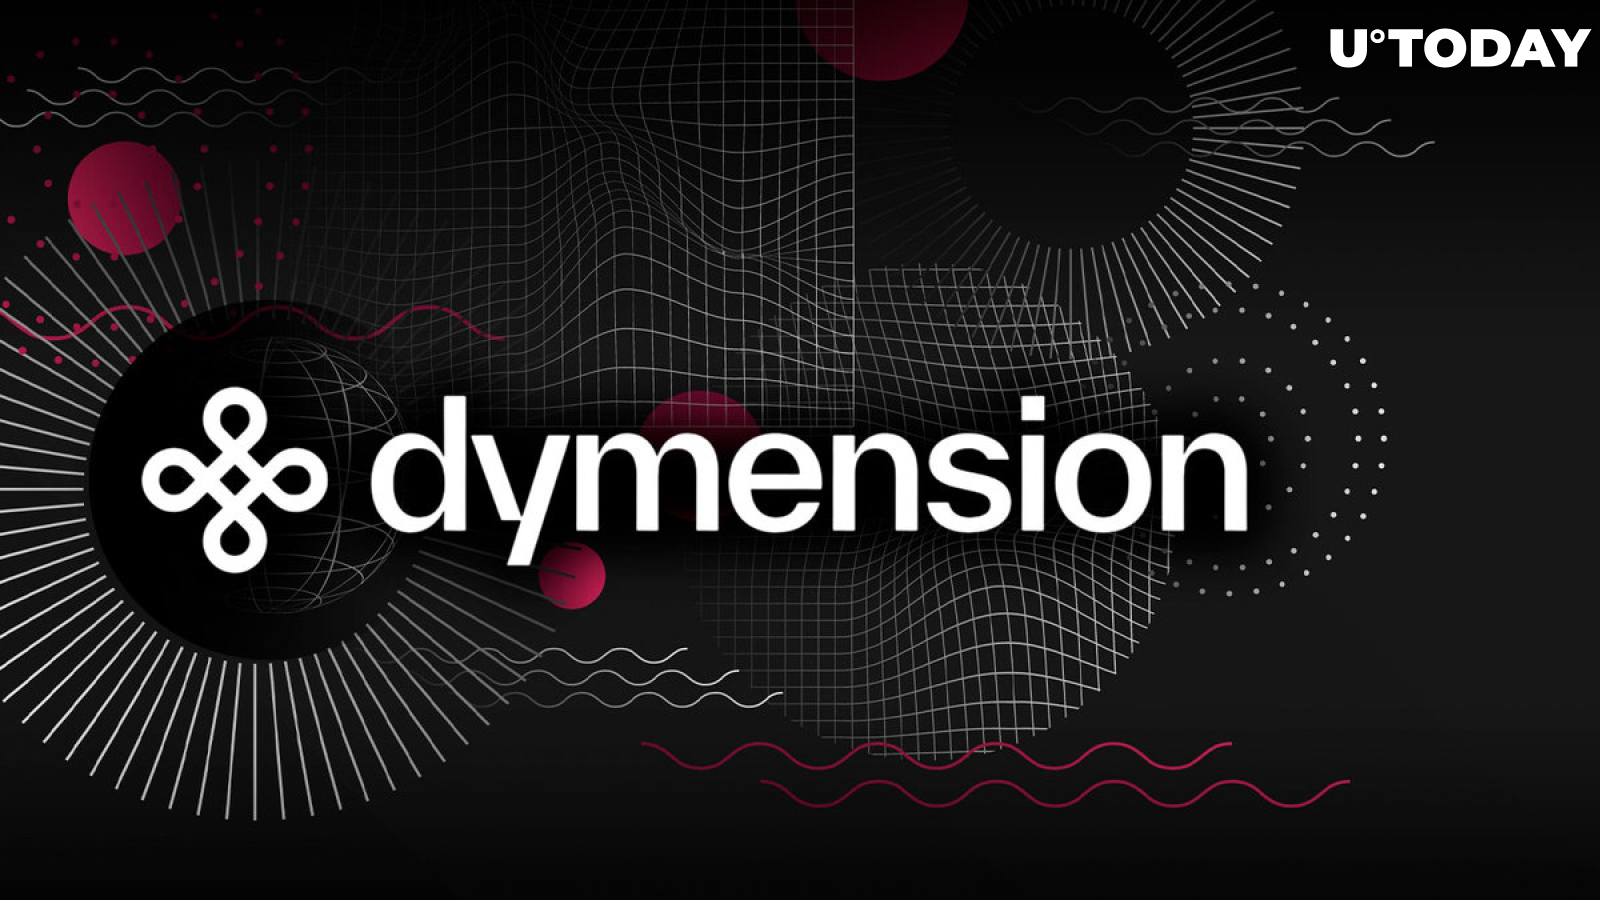 Modular Blockchain Dymension Launches Testnet for Its RollApps: Details